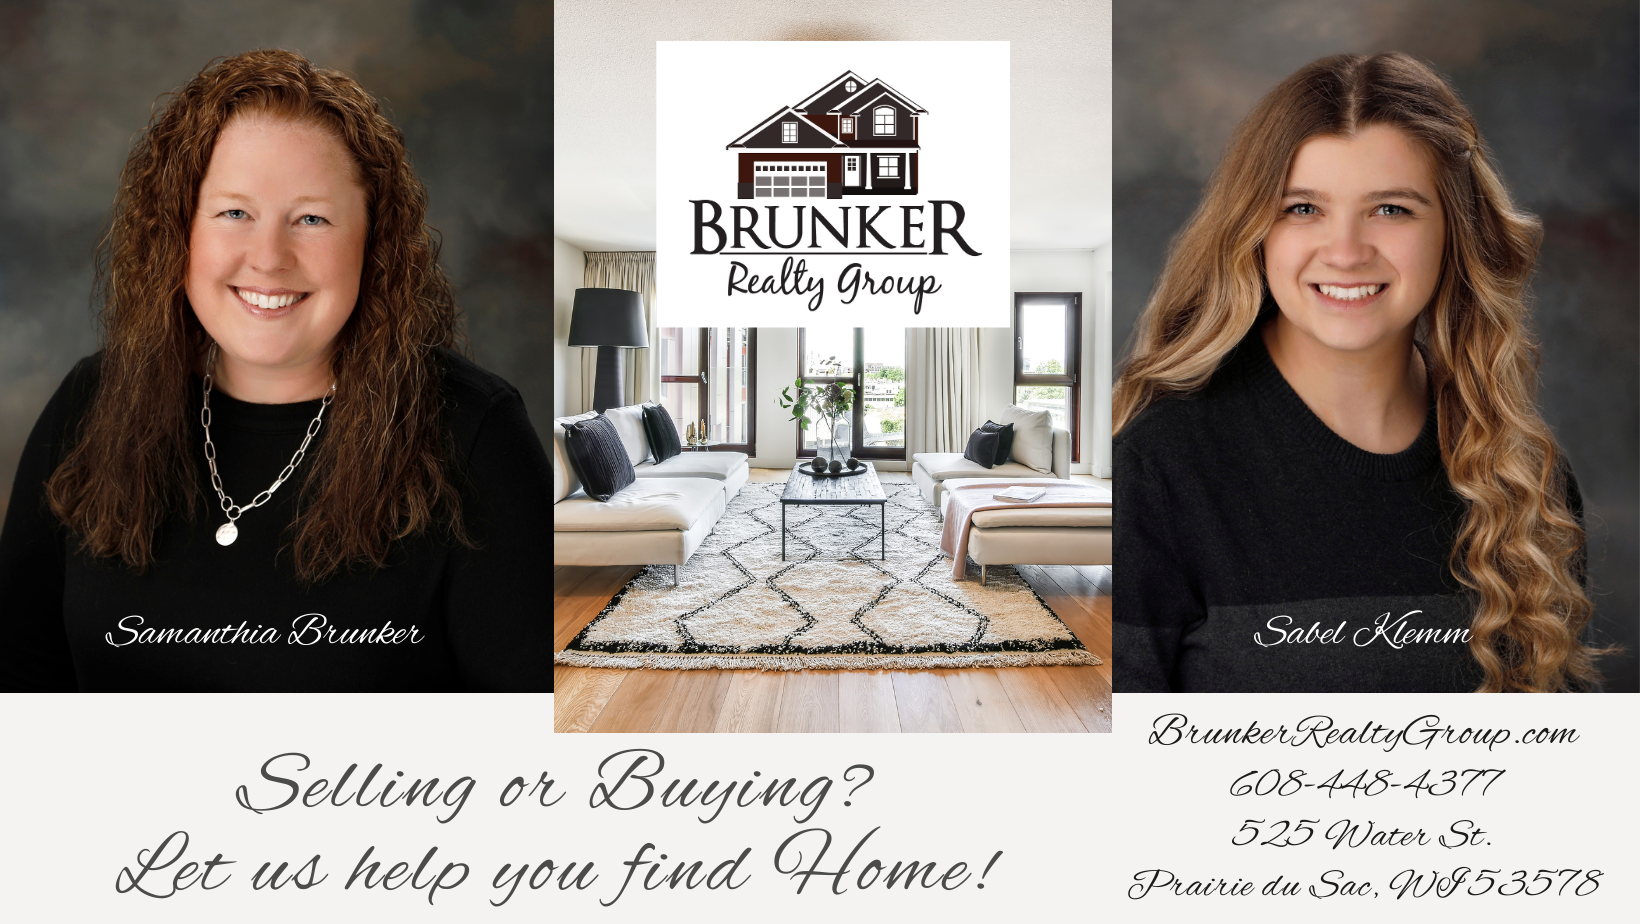 Brunker Realty Group | Get to Know us!